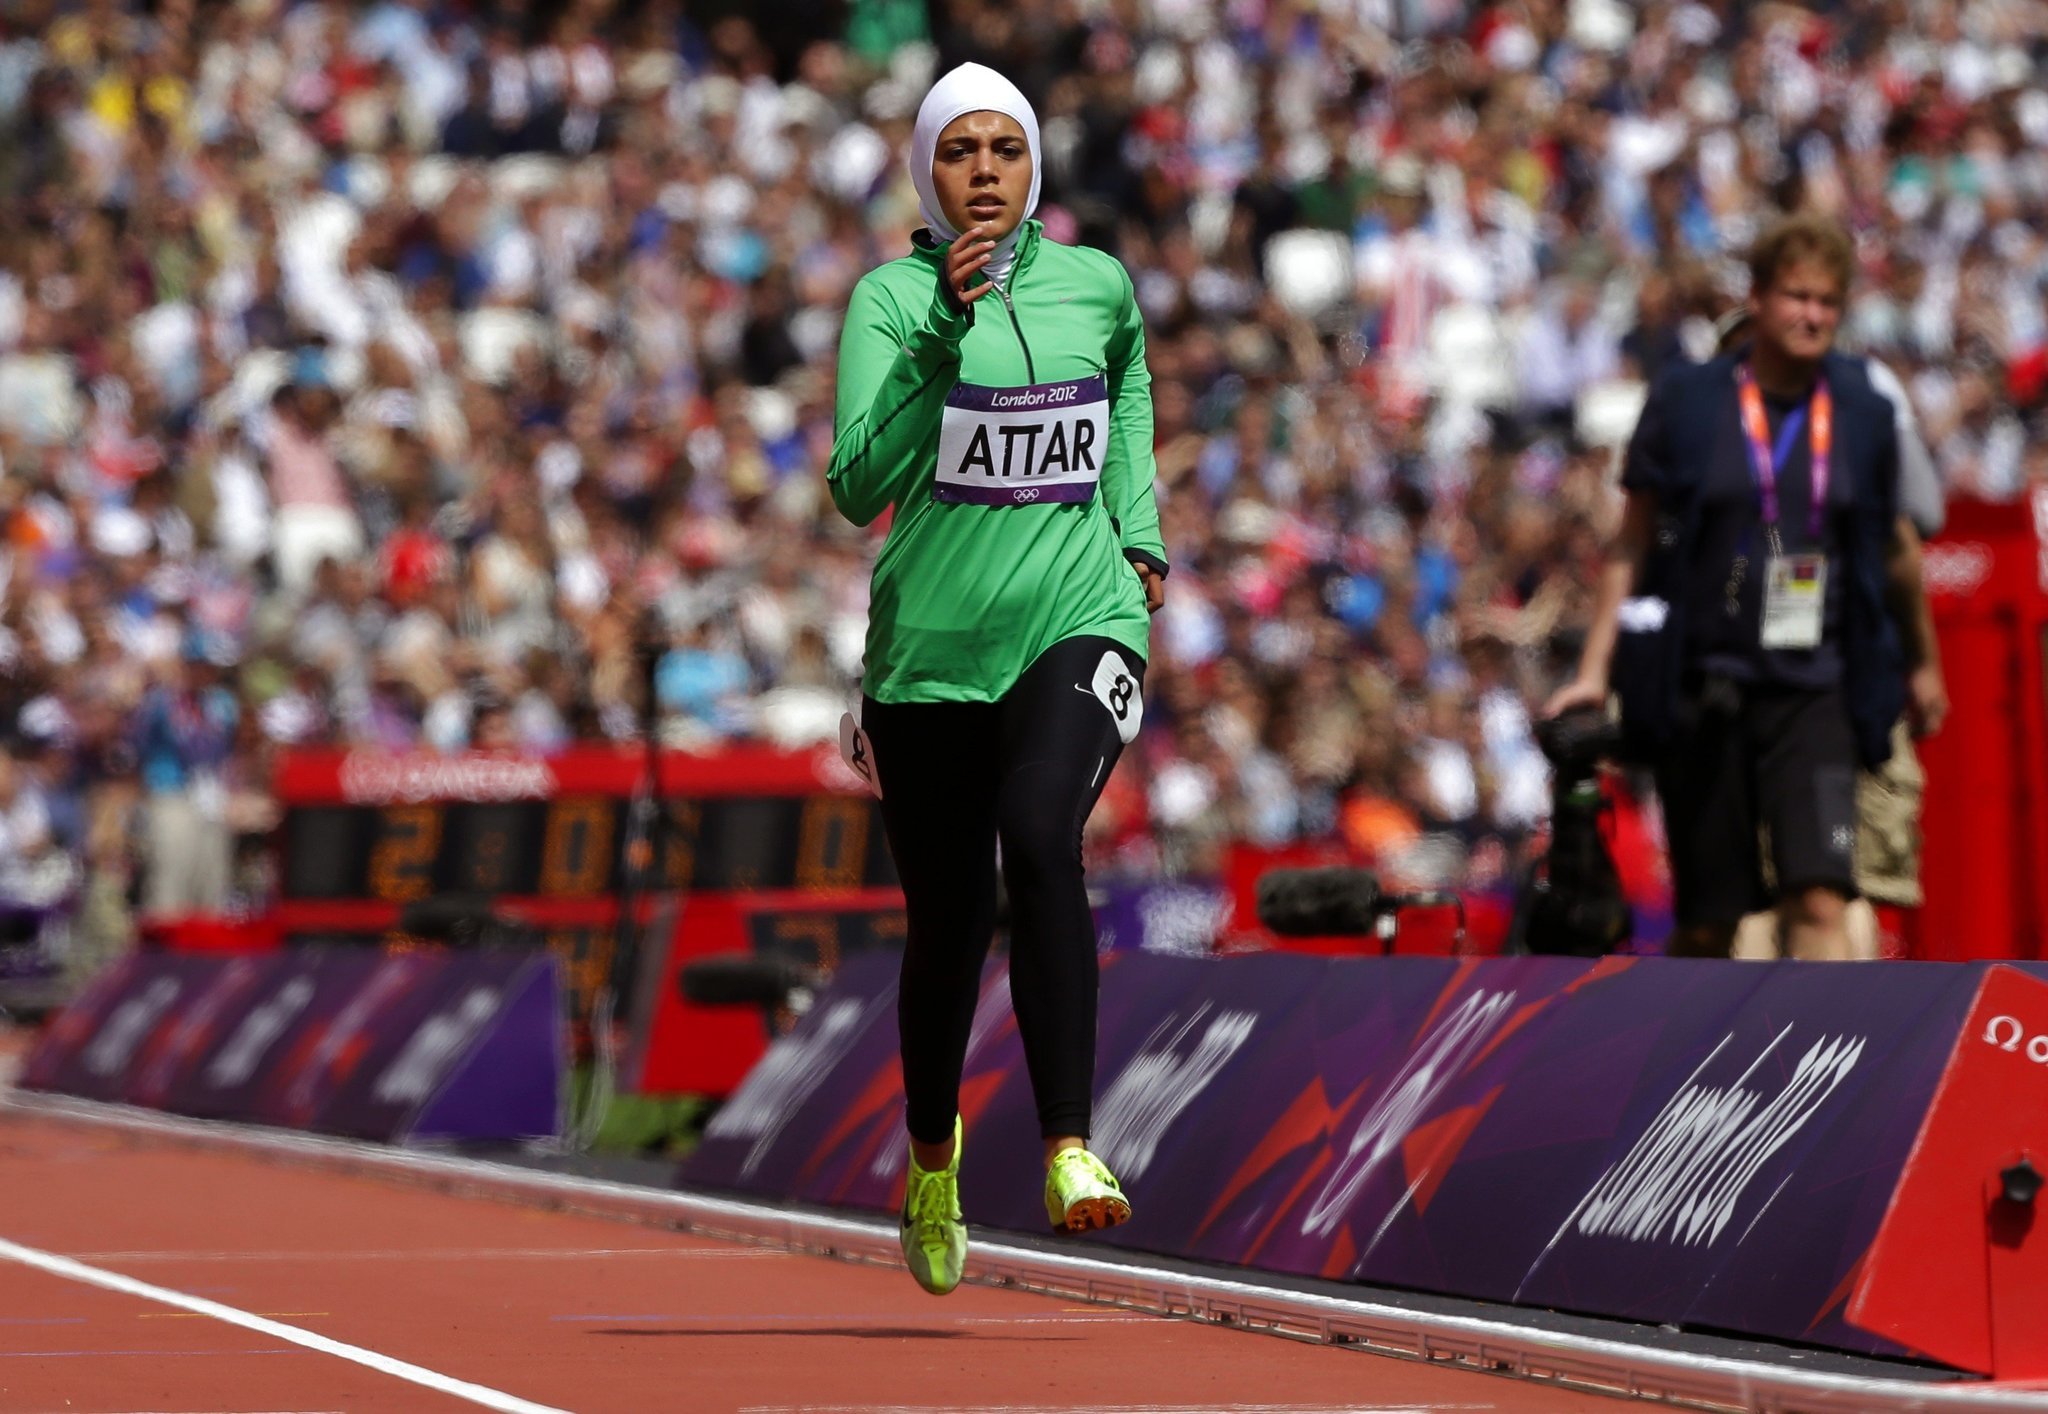 Nikes New Pro Hijab Line Will Help Muslim Women Compete While